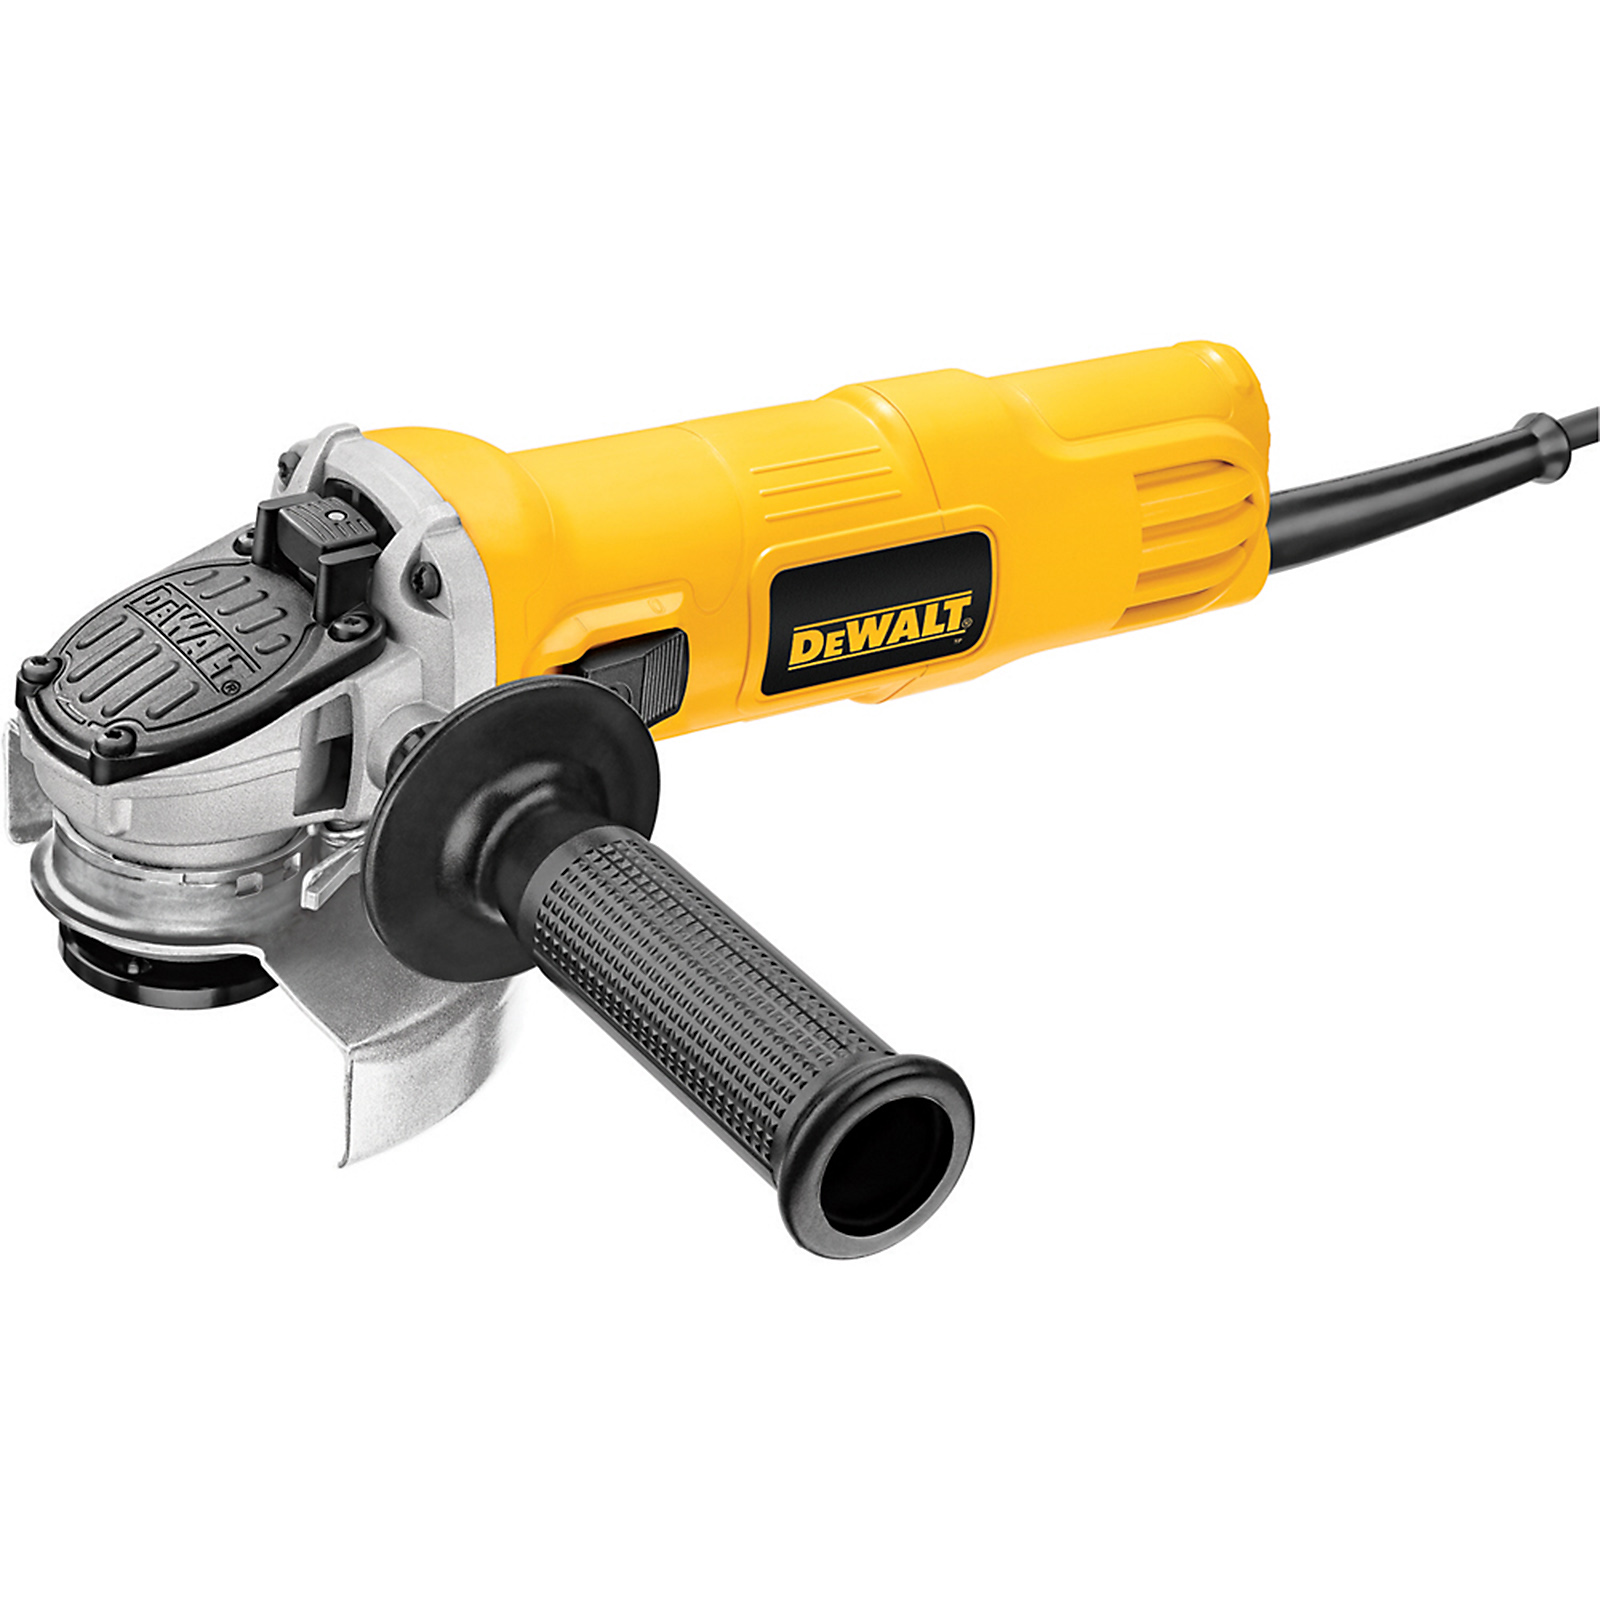 DeWalt DWE4011 4-1/2-Inch Small Angle Grinder with One-Touch Guard